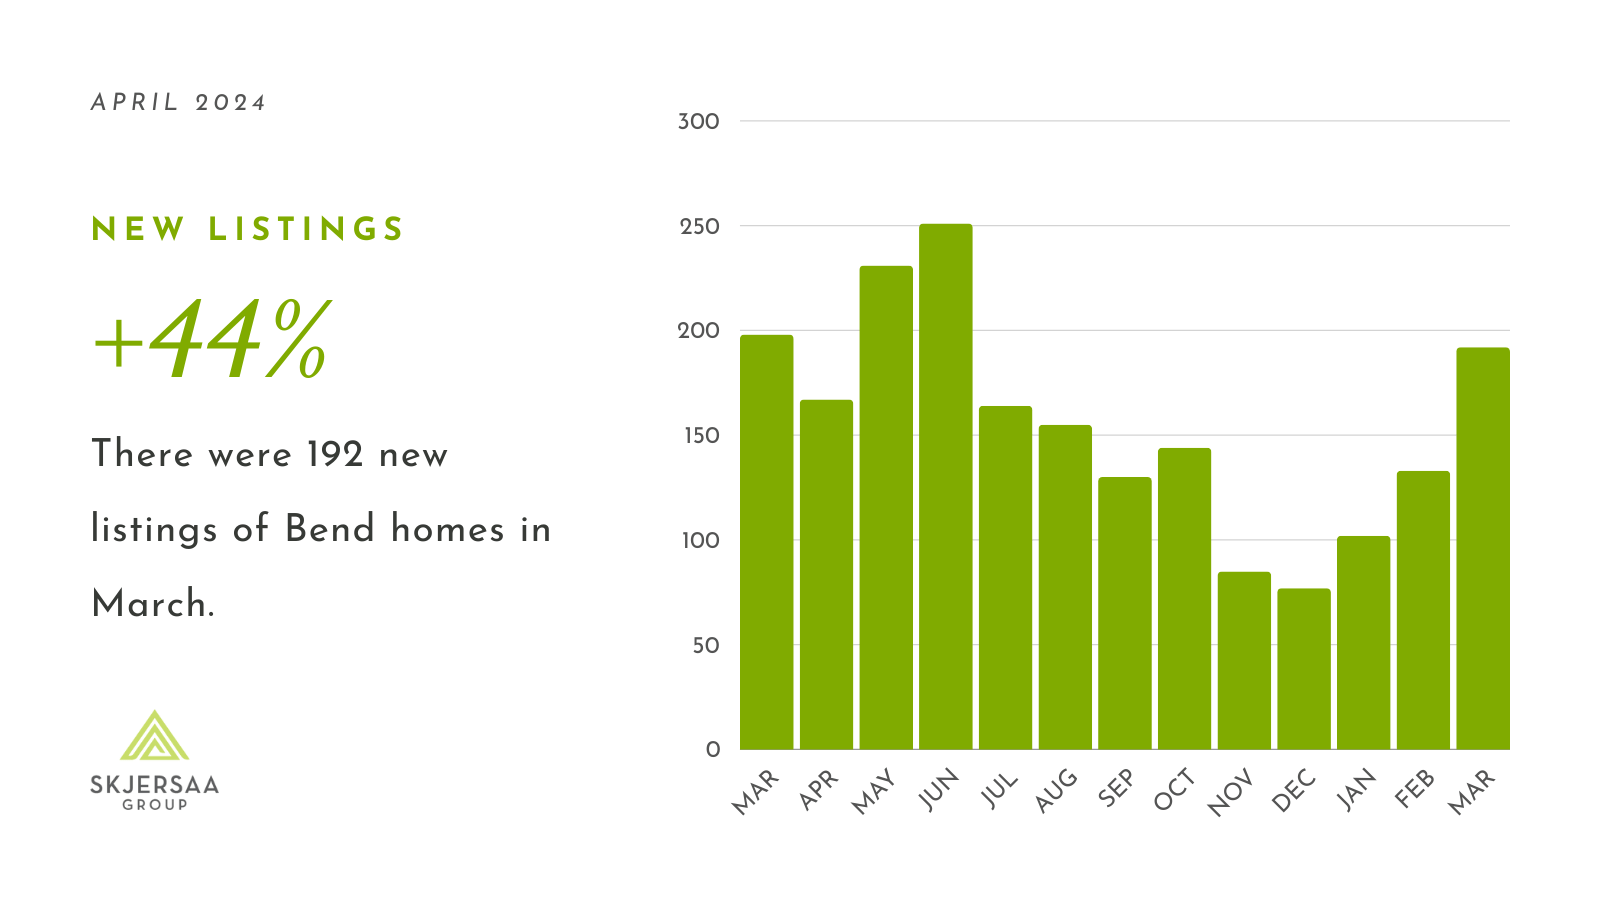 Bar graph showing new listings month-by-month since March 2023